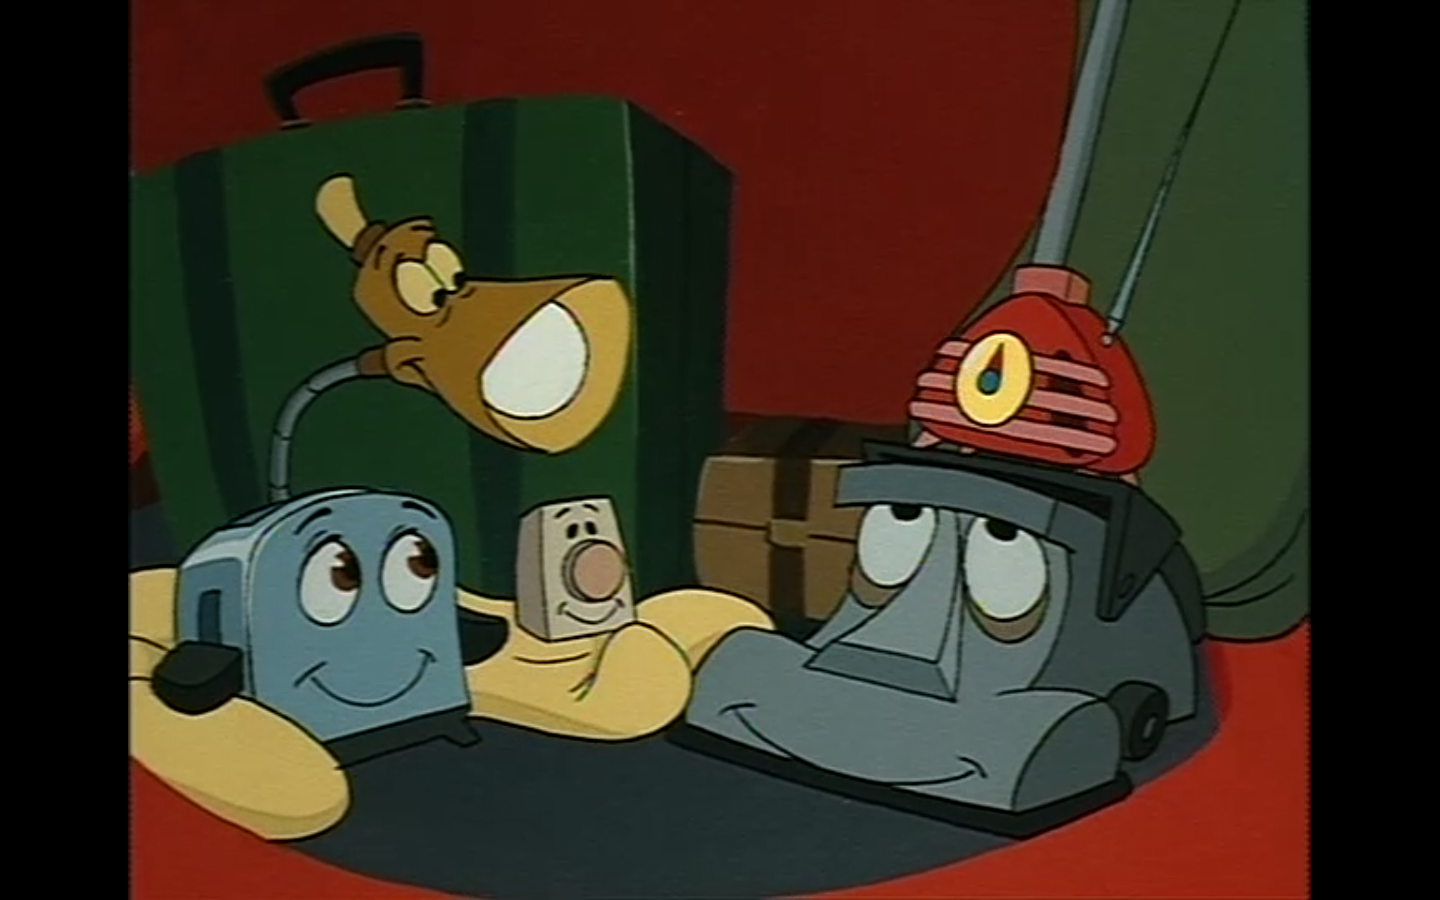 the brave little toaster goes to mars movie